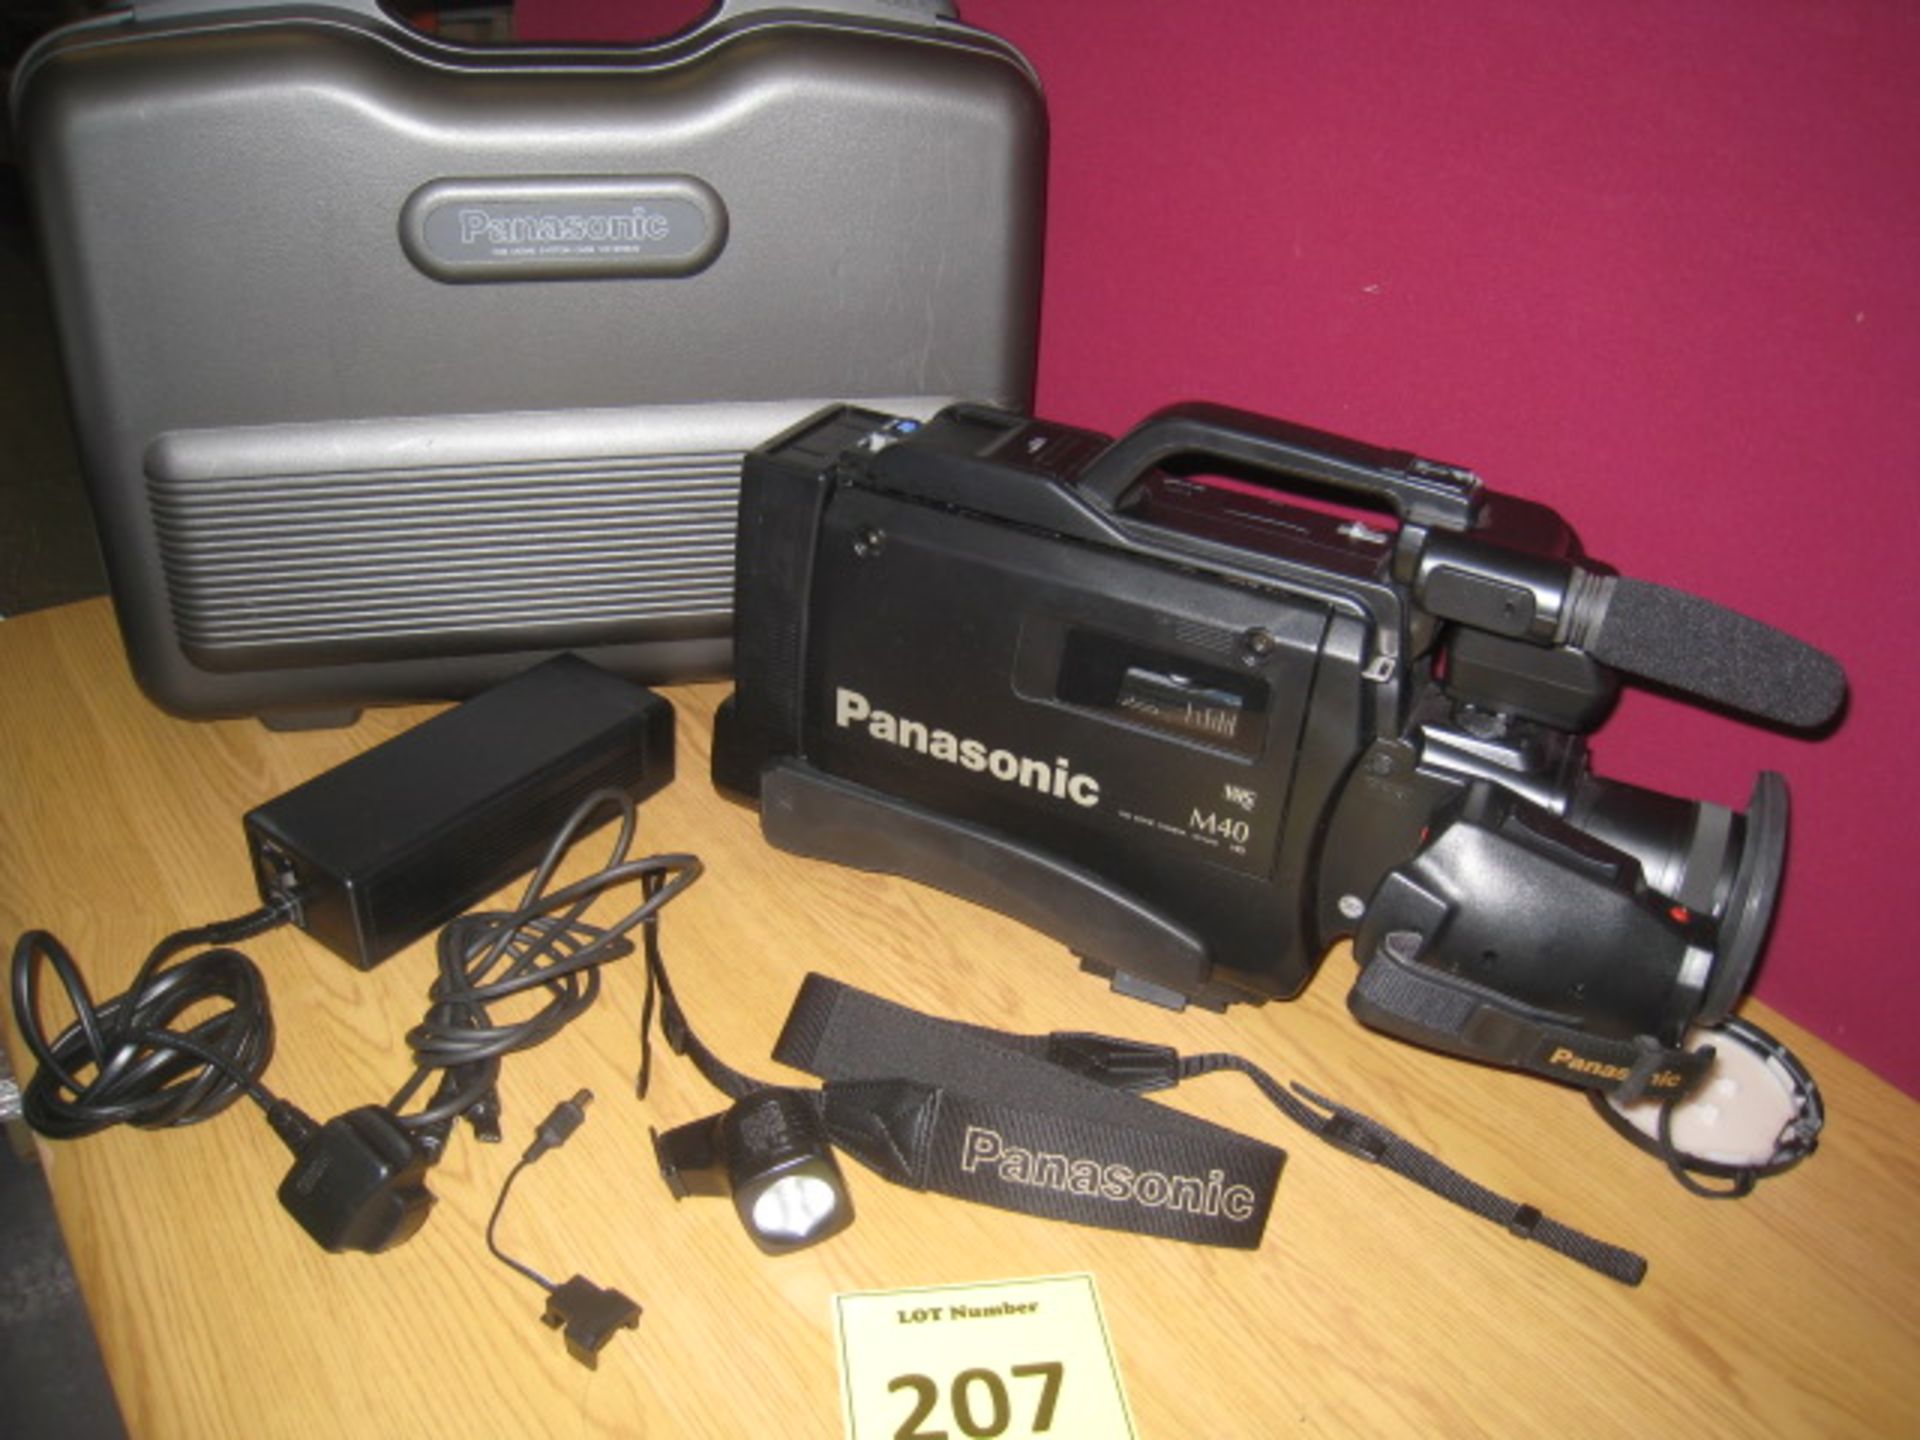 PANASONIC M40 VHS MOVIE CAMERA NV-M40 HQ. MODEL NV-M40B. IN MOULDED CARRY CASE WITH ATTACHMENTS AS